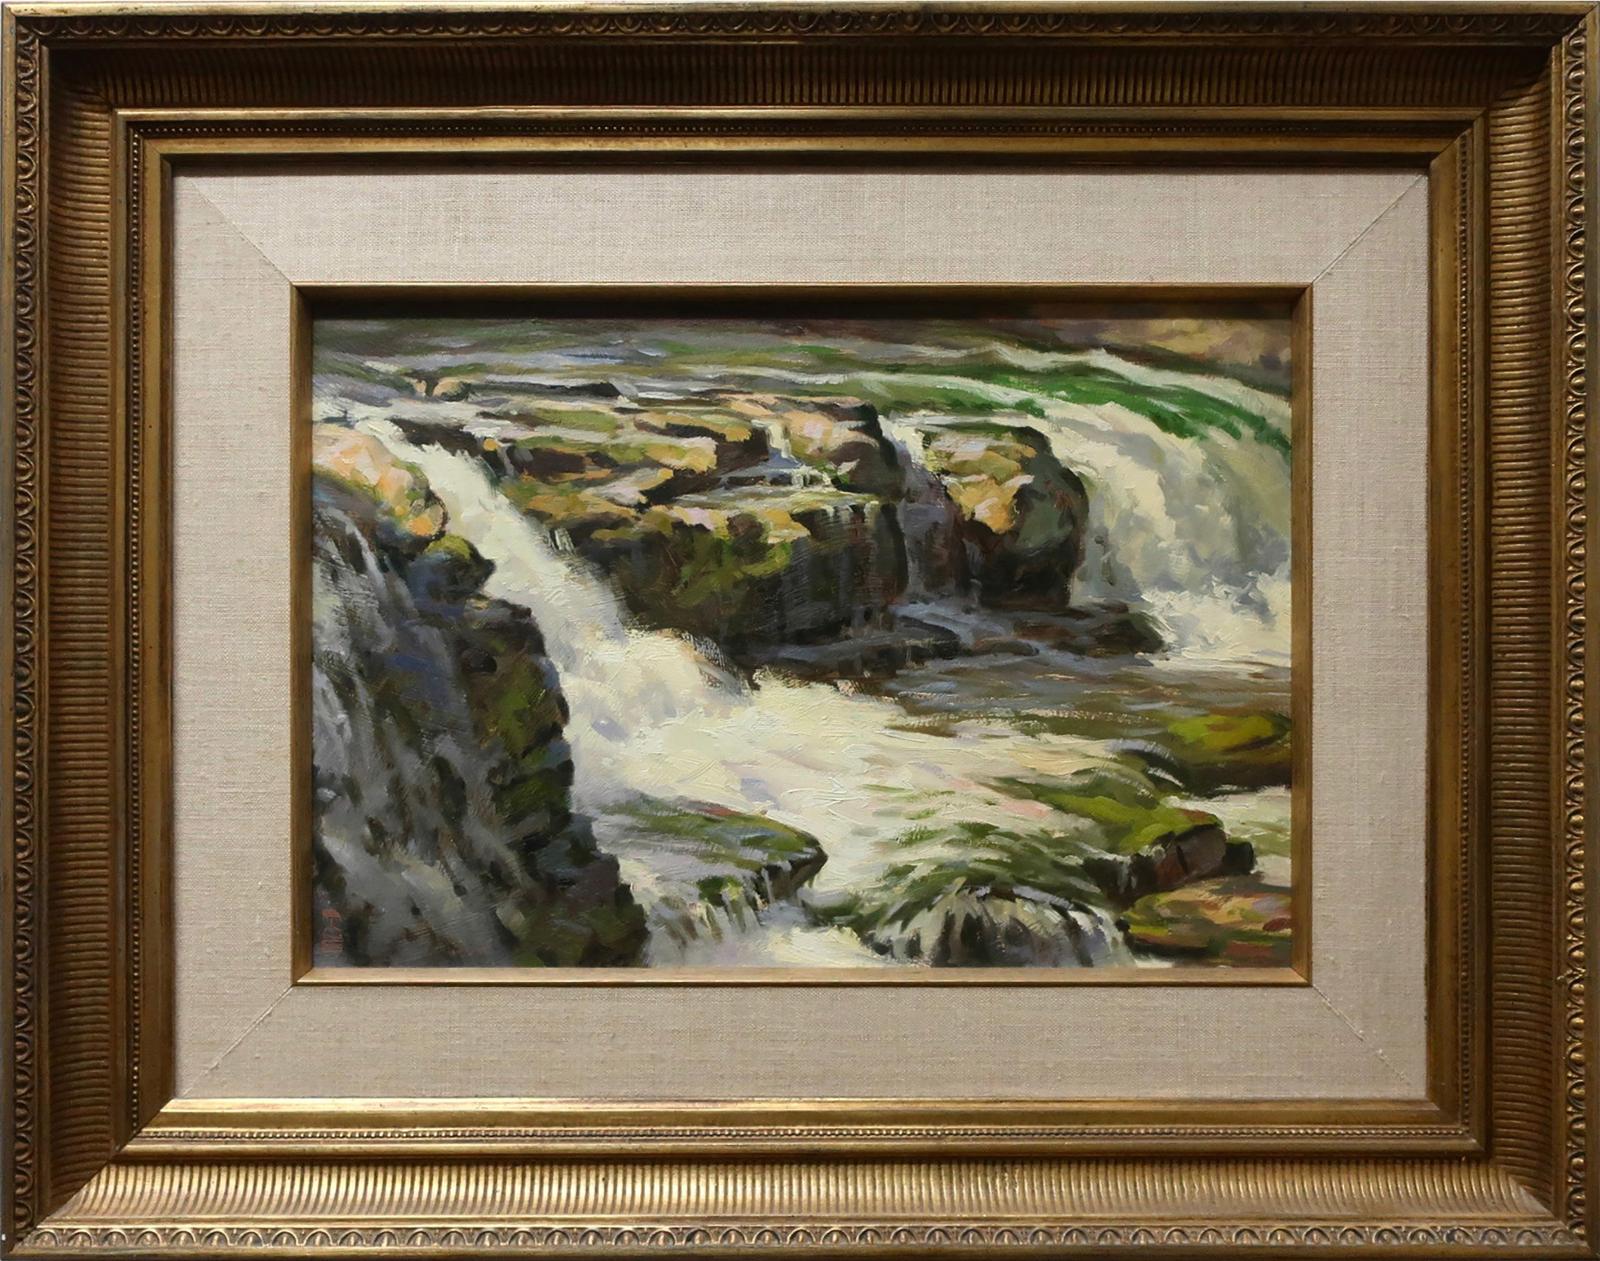 Tony Bianco (1964) - Laughlin Falls - Severn Twsp, Ont., Can.